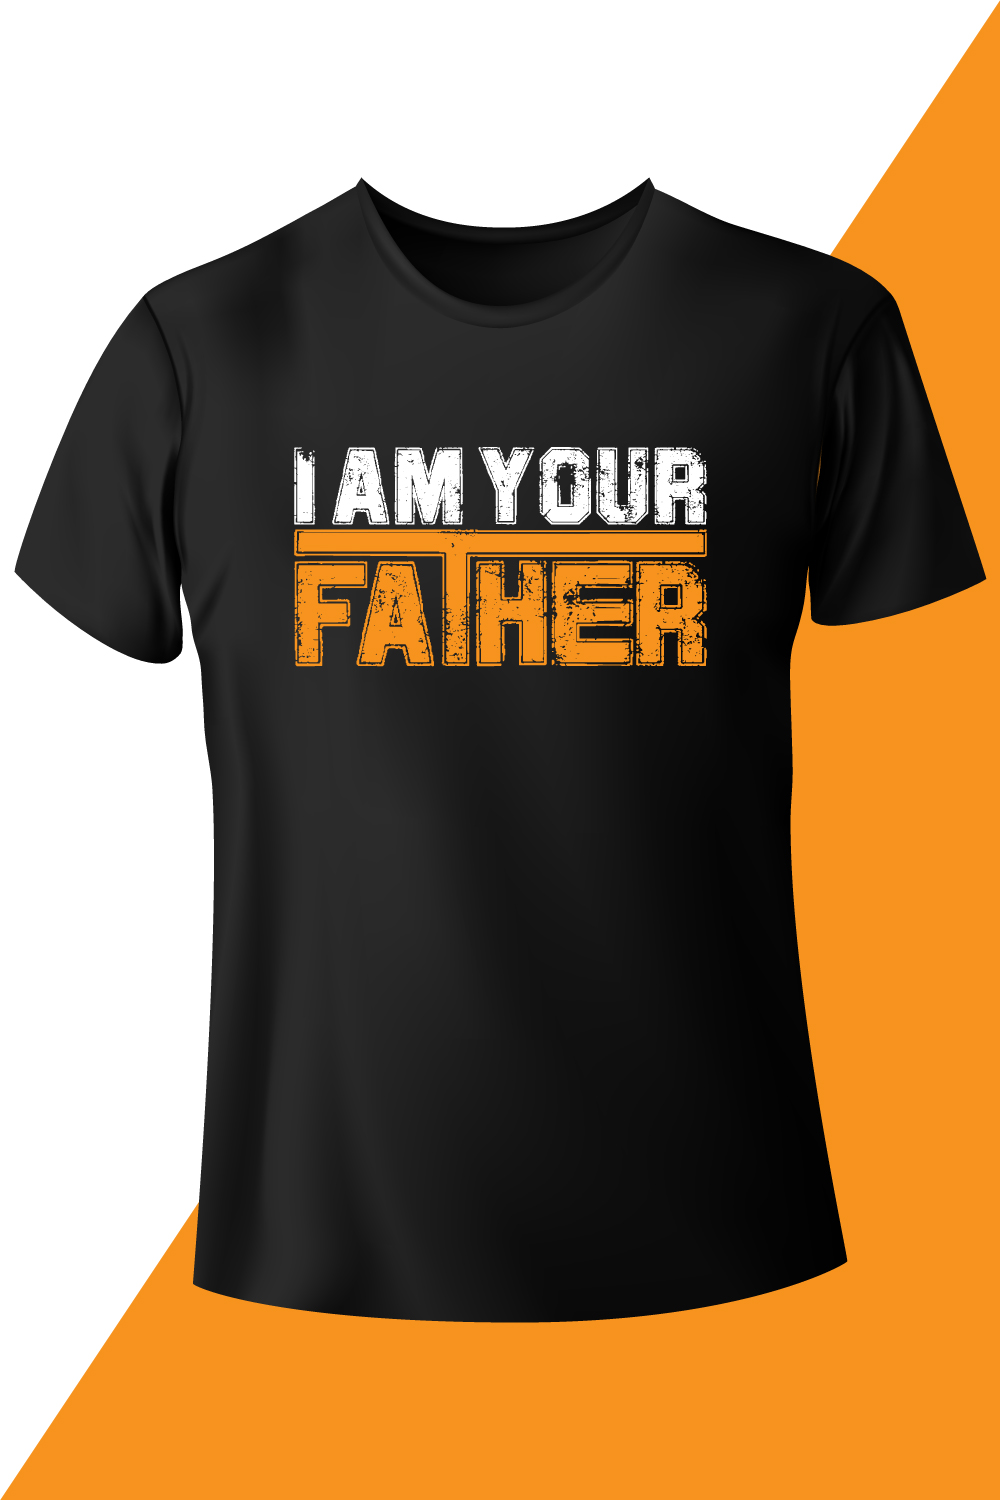 Image of a black t-shirt with a wonderful print I Am Your Father.